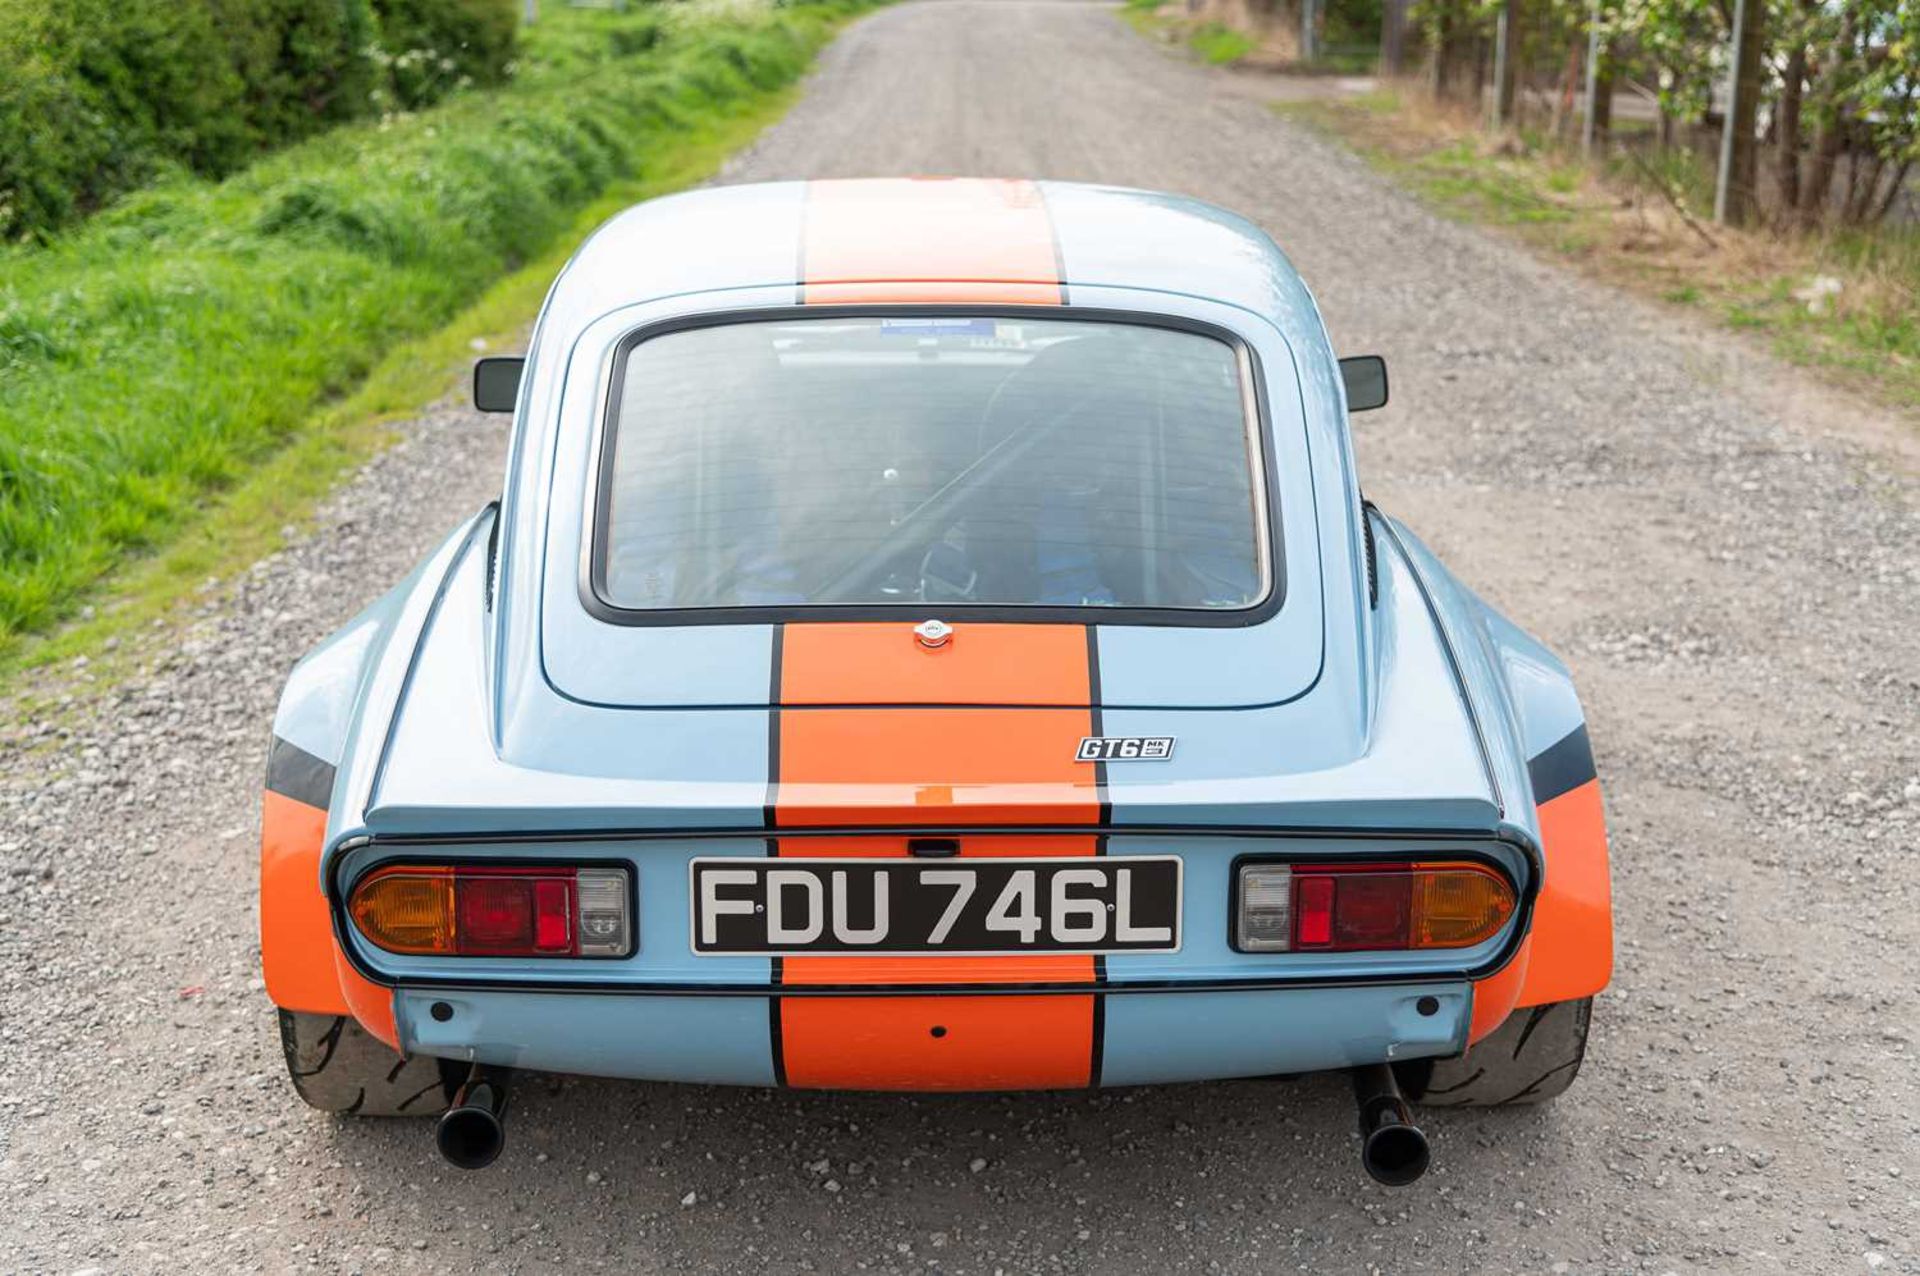 1973 Triumph GT6  ***NO RESERVE*** Presented in Gulf Racing-inspired paintwork, road-going track wea - Bild 12 aus 65